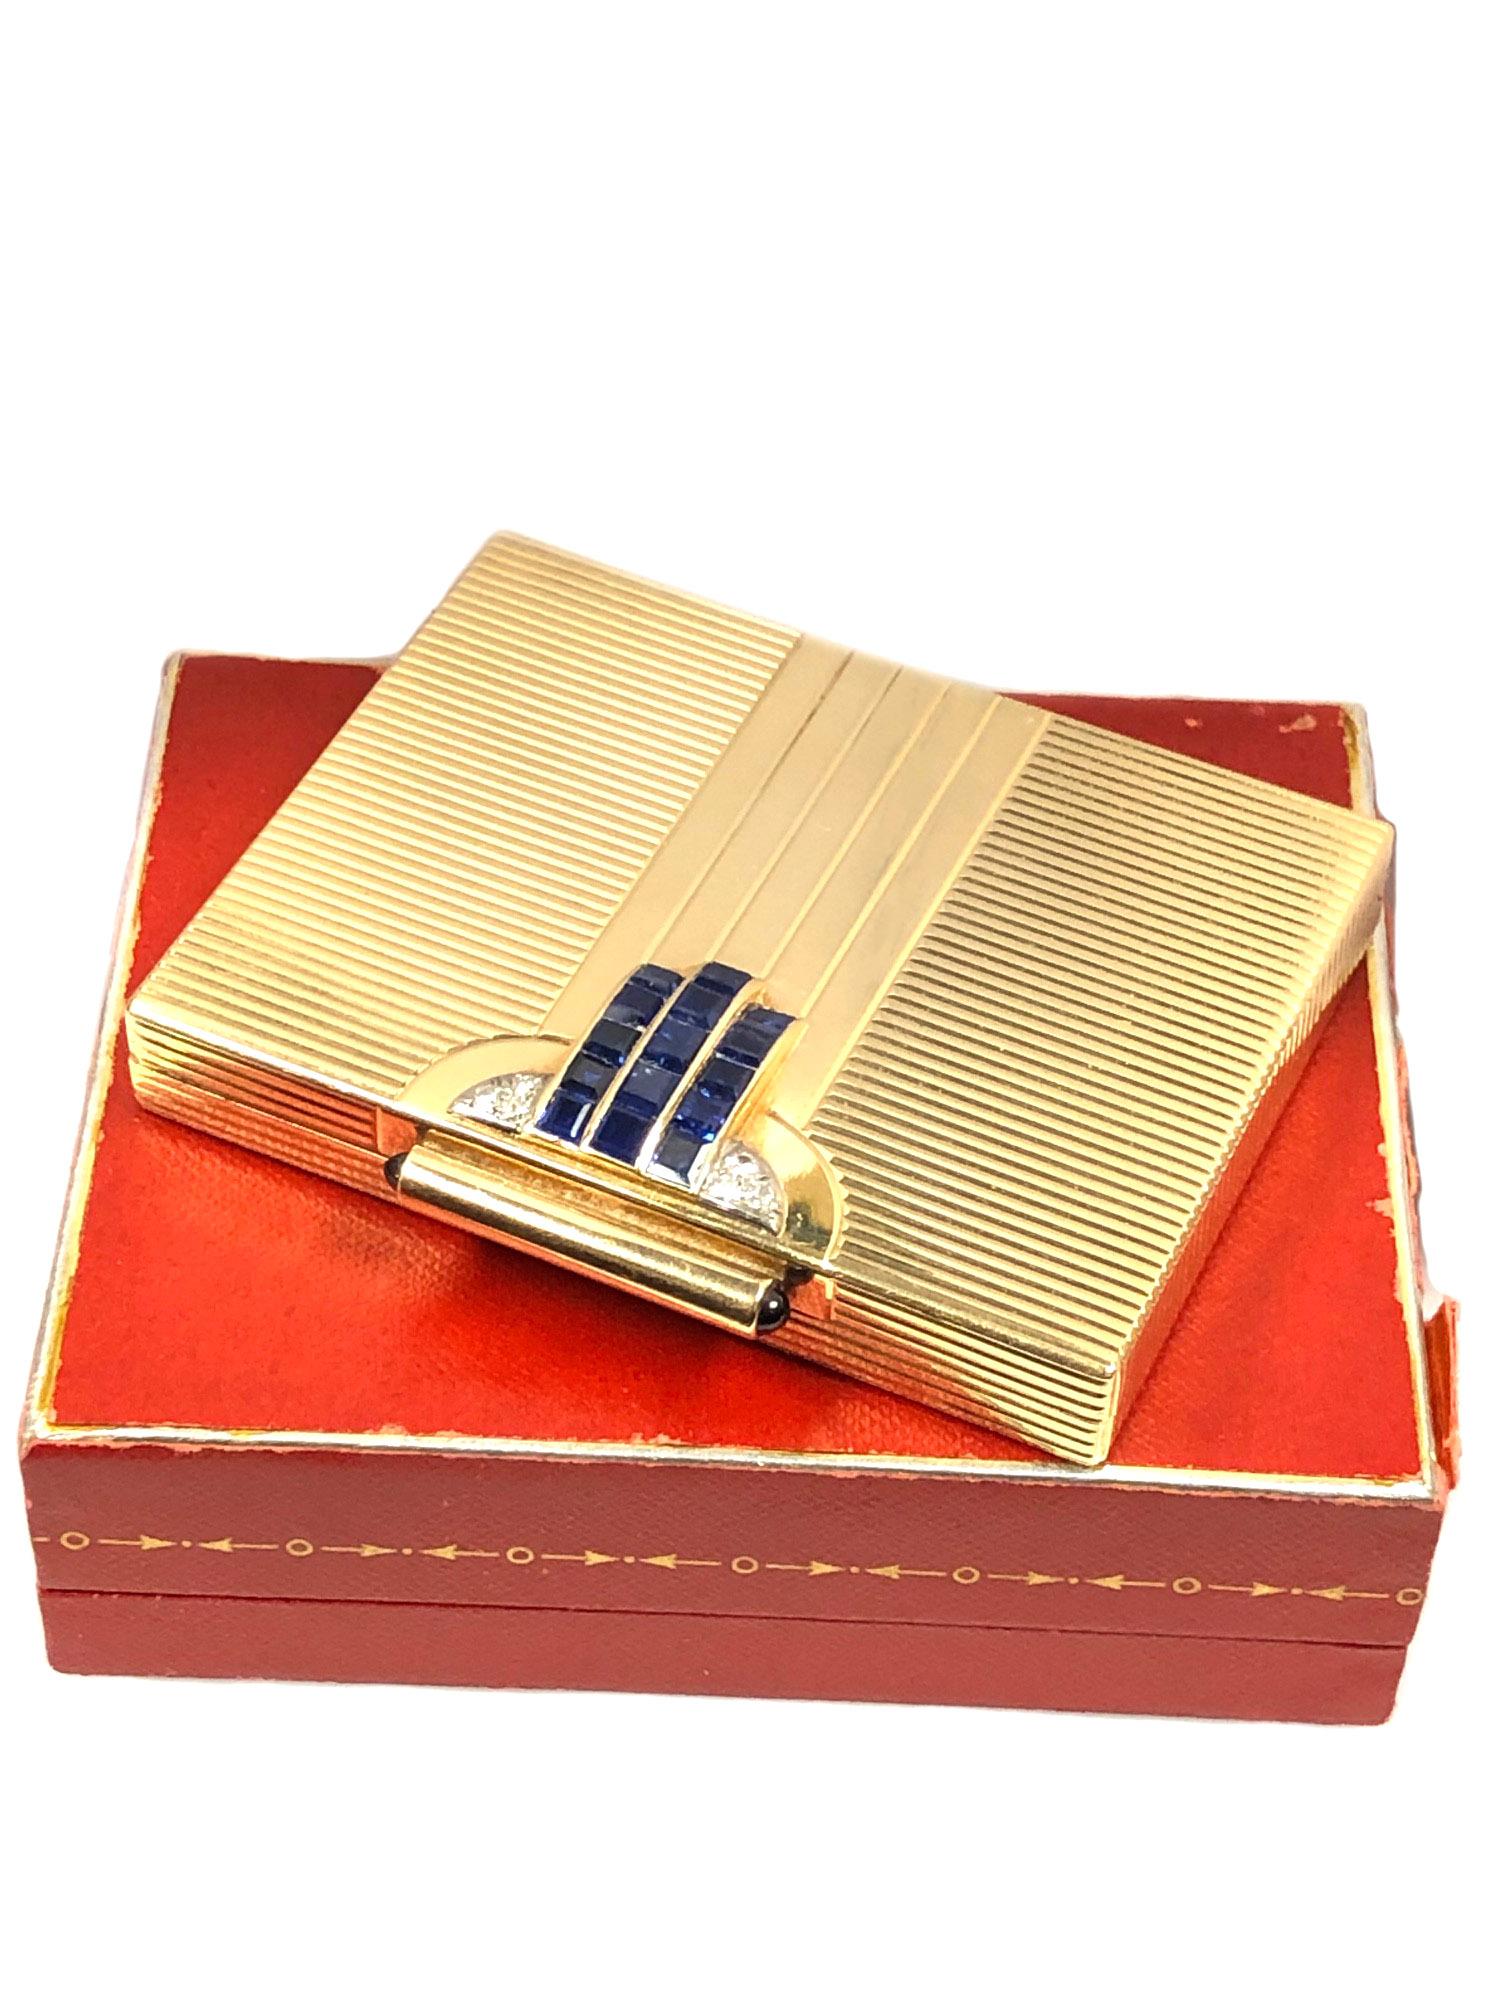 Cartier 1940s Art Deco Gold Diamond and Sapphire Compact 2